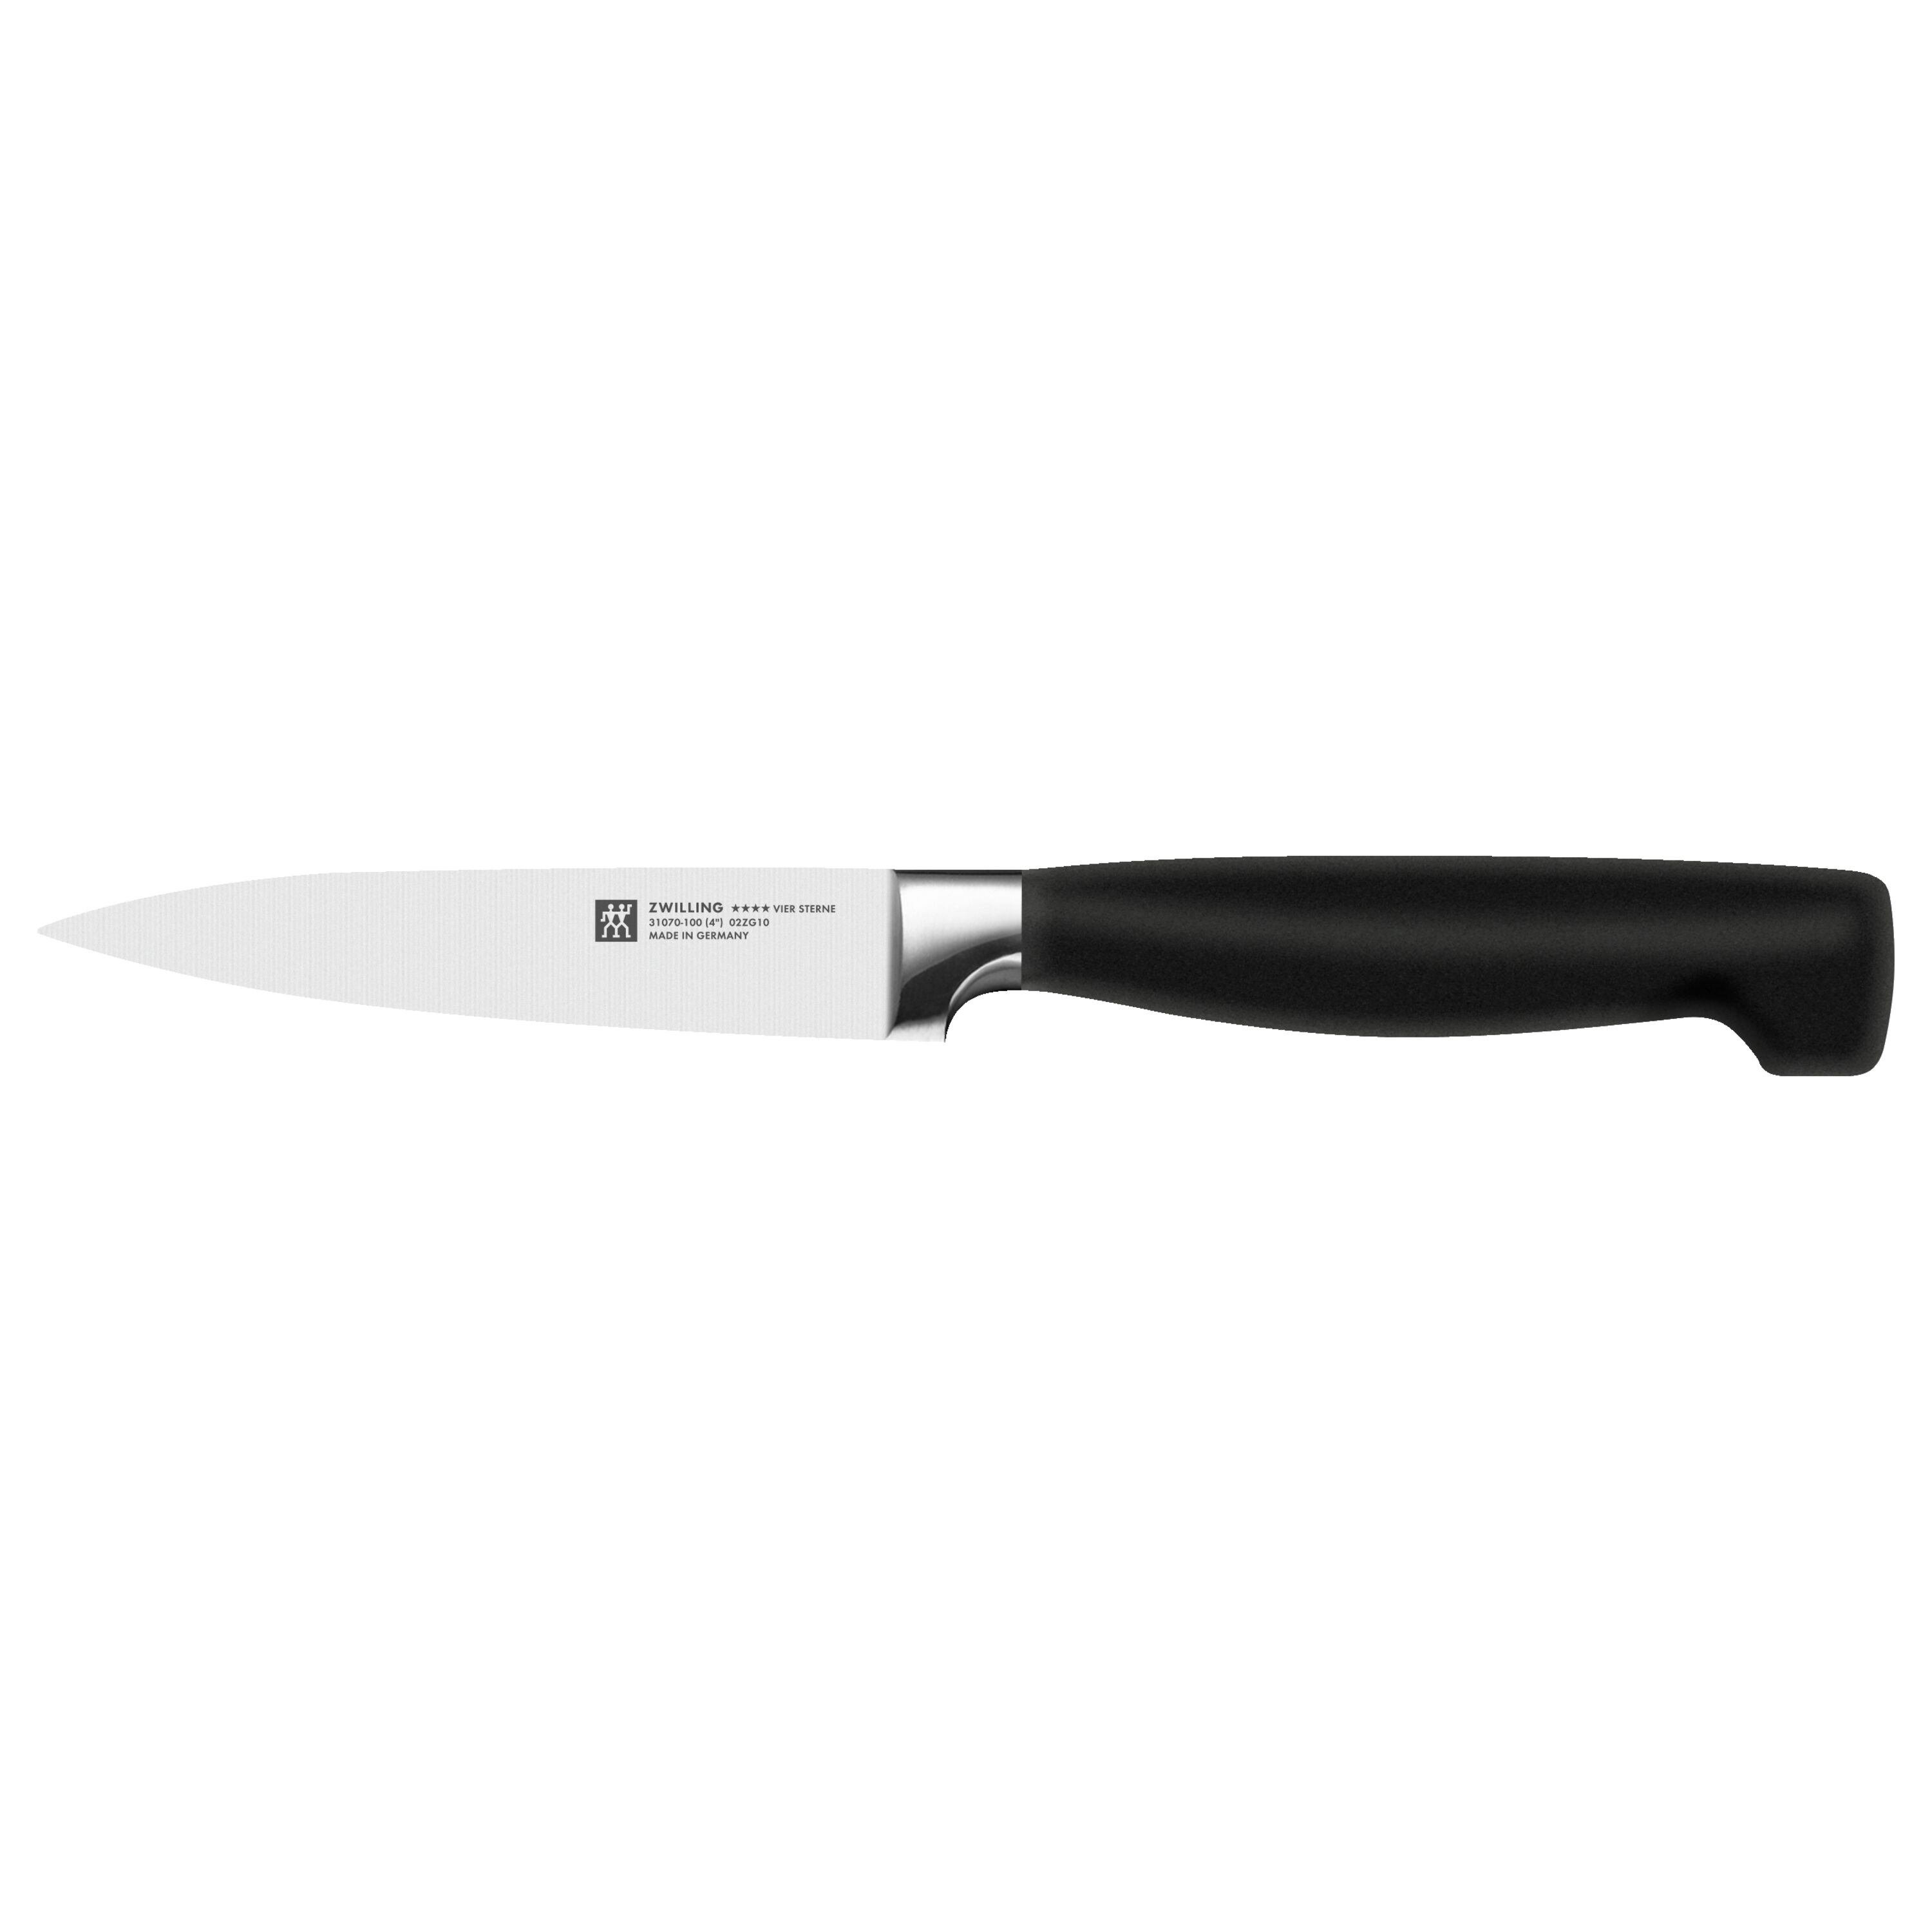 https://www.zwilling.com/on/demandware.static/-/Sites-zwilling-master-catalog/default/dw982dbf99/images/large/31070-100-0_1.jpg